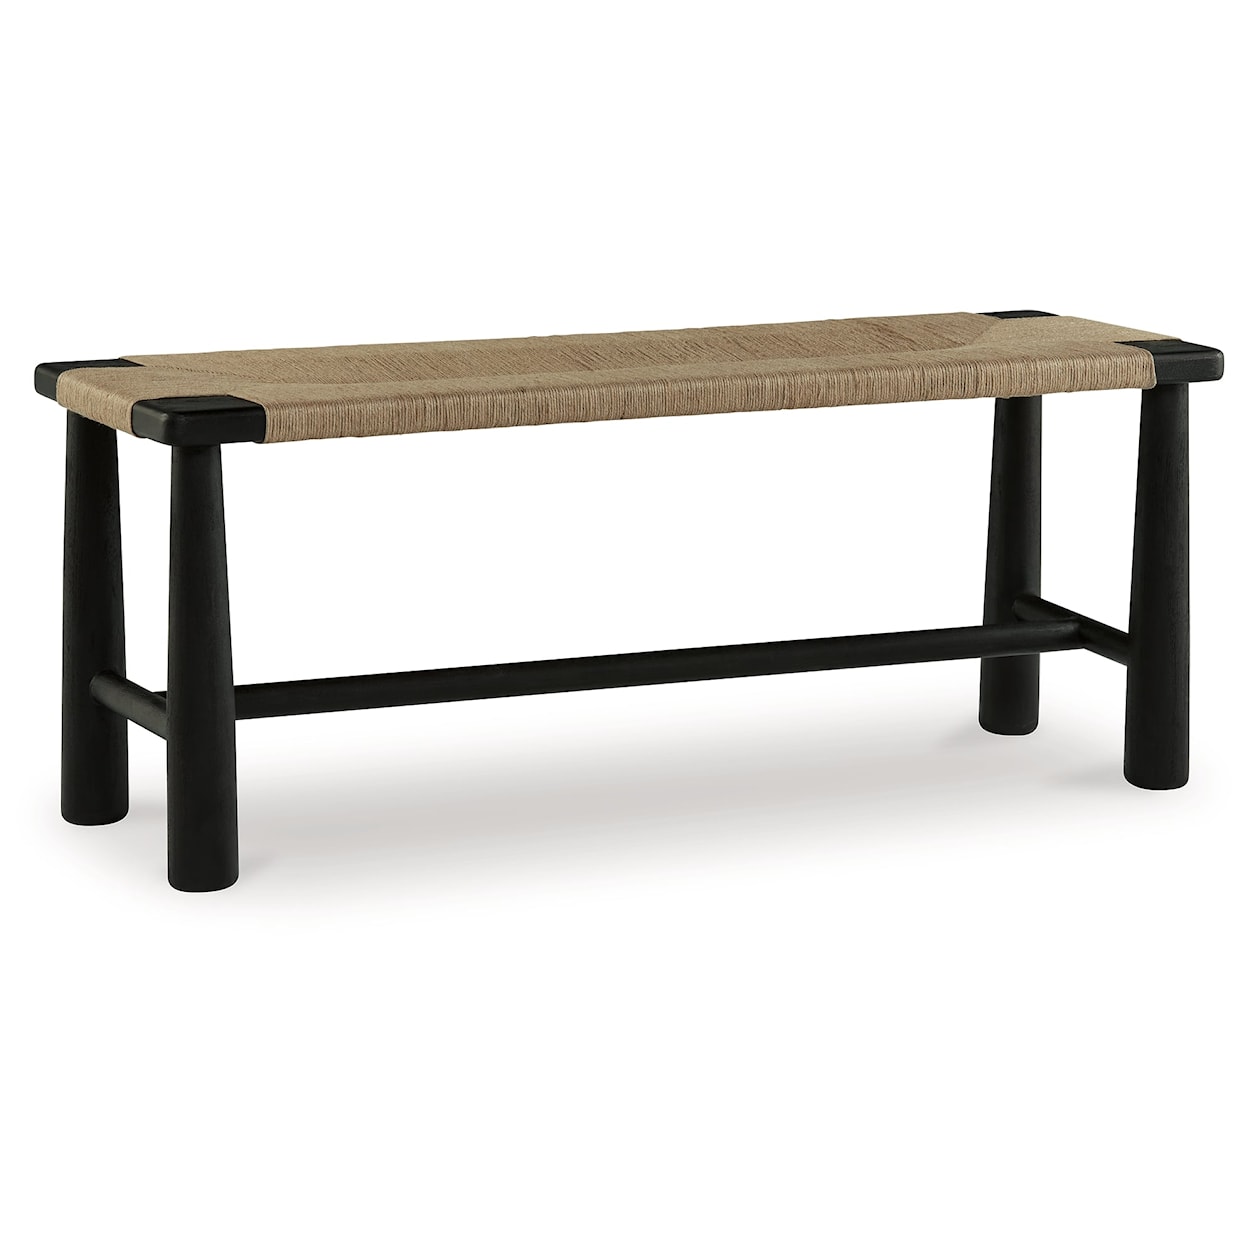 Benchcraft Acerman Accent Bench